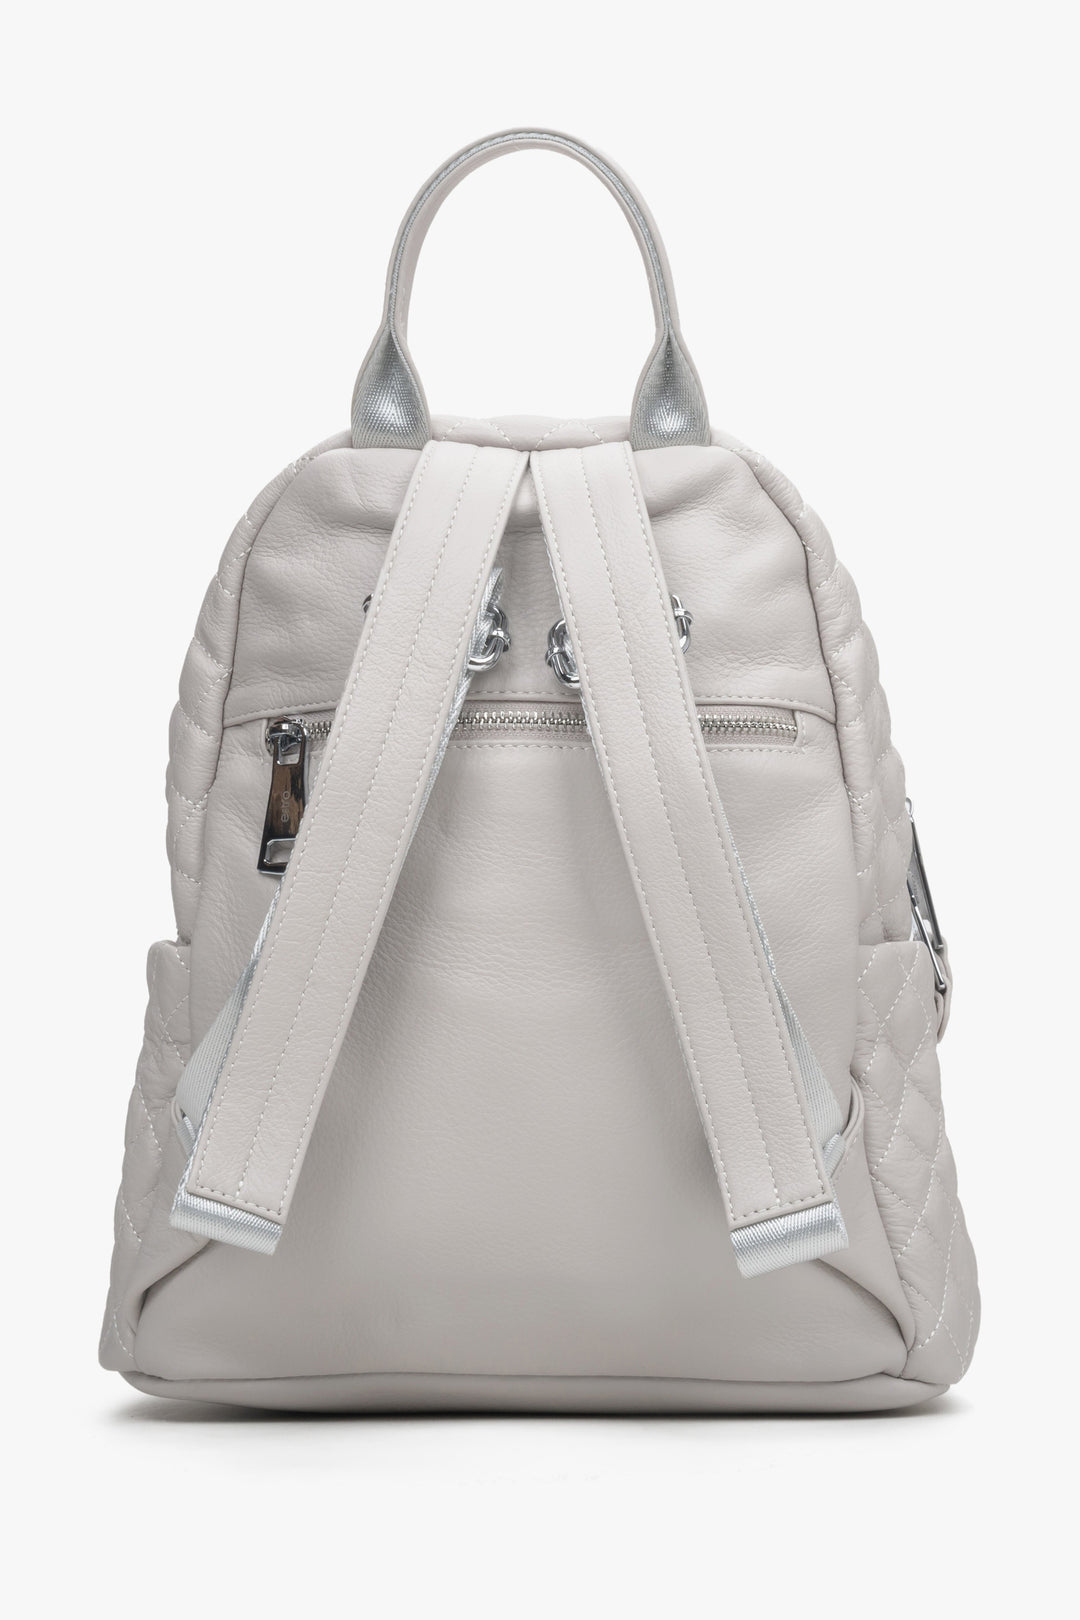 Women's light beige urban backpack by Estro - close-up of the back.